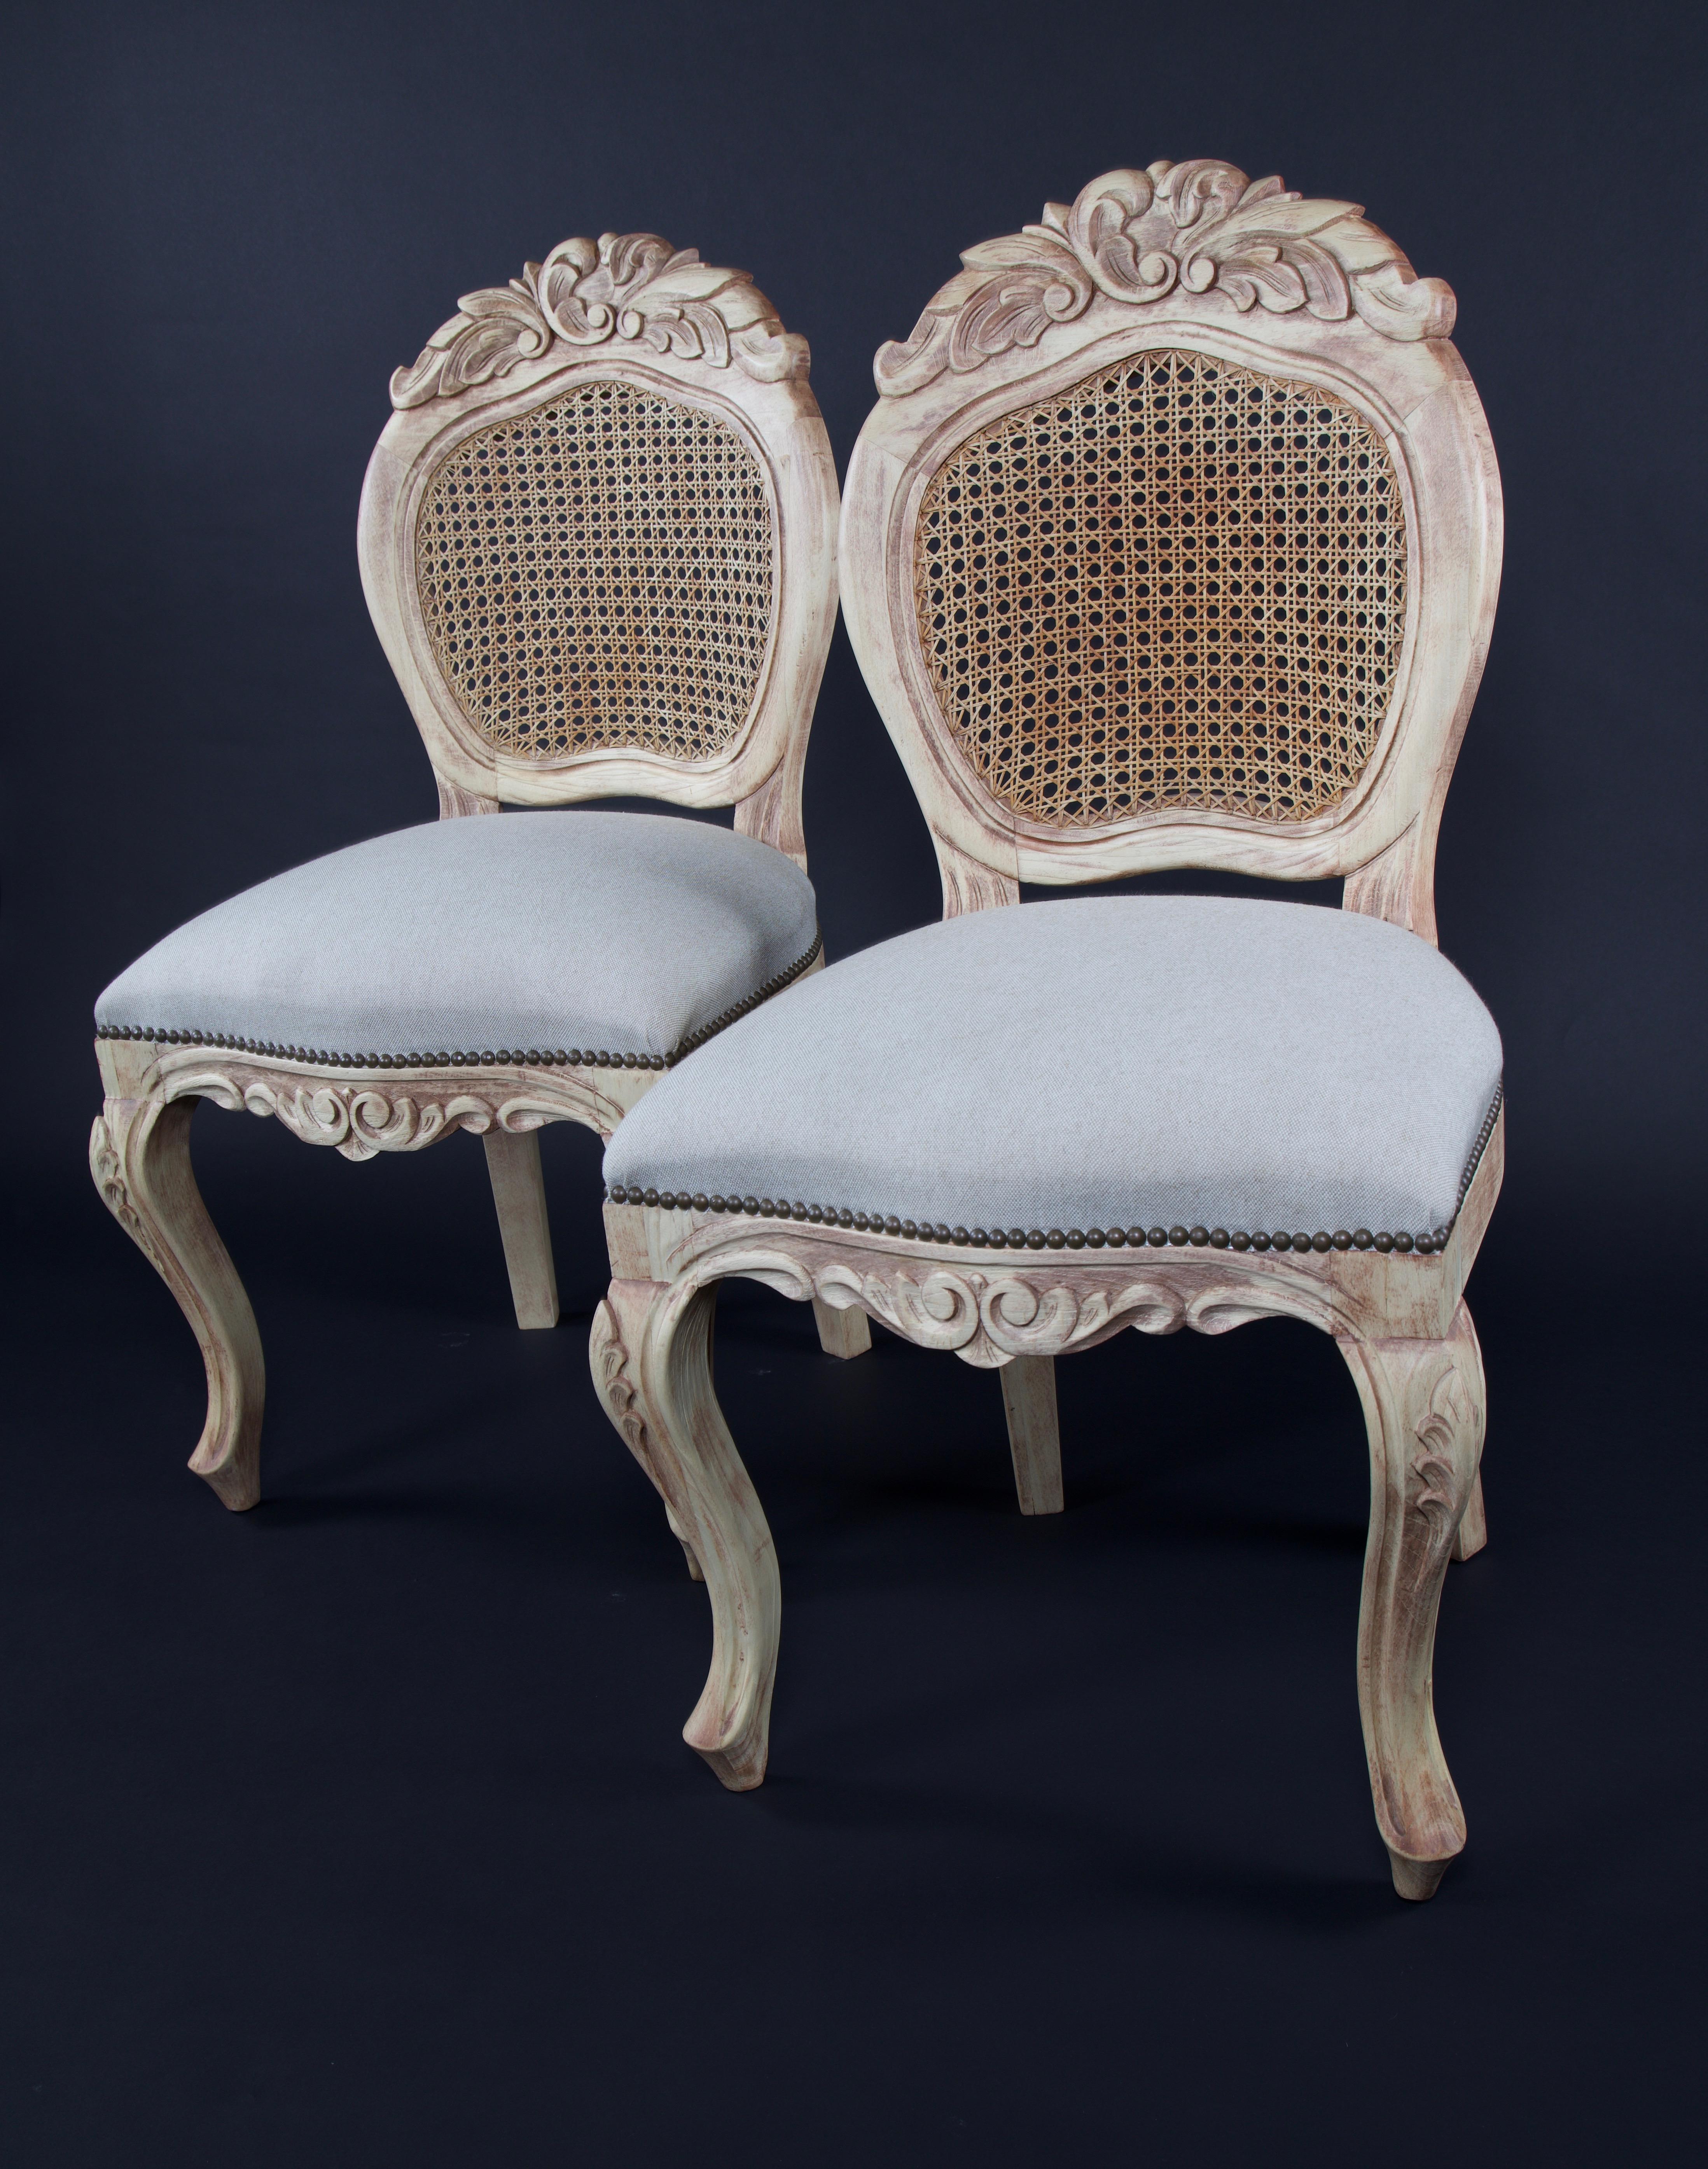 A pair of round side chairs in the style of Louis XV with cabriole legs headed with carved acanthus leaves, a round caned back with cresting that is embellished with multiple carved acanthus leaves with beads and an apron which has a pair of mirror